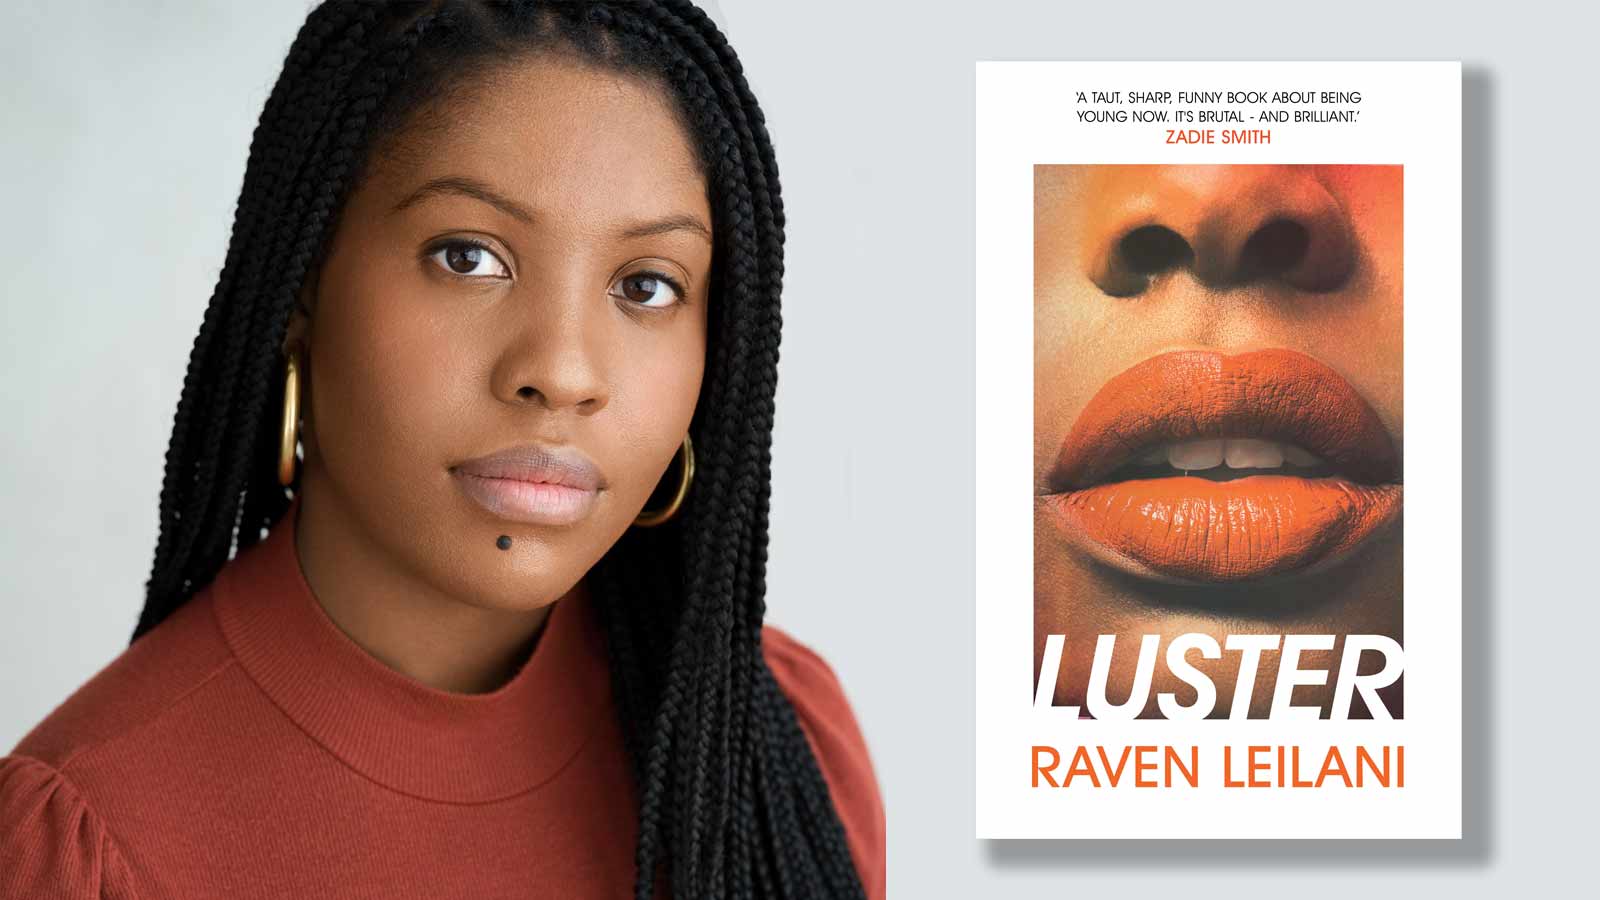 Raven Leilani and the cover of Luster